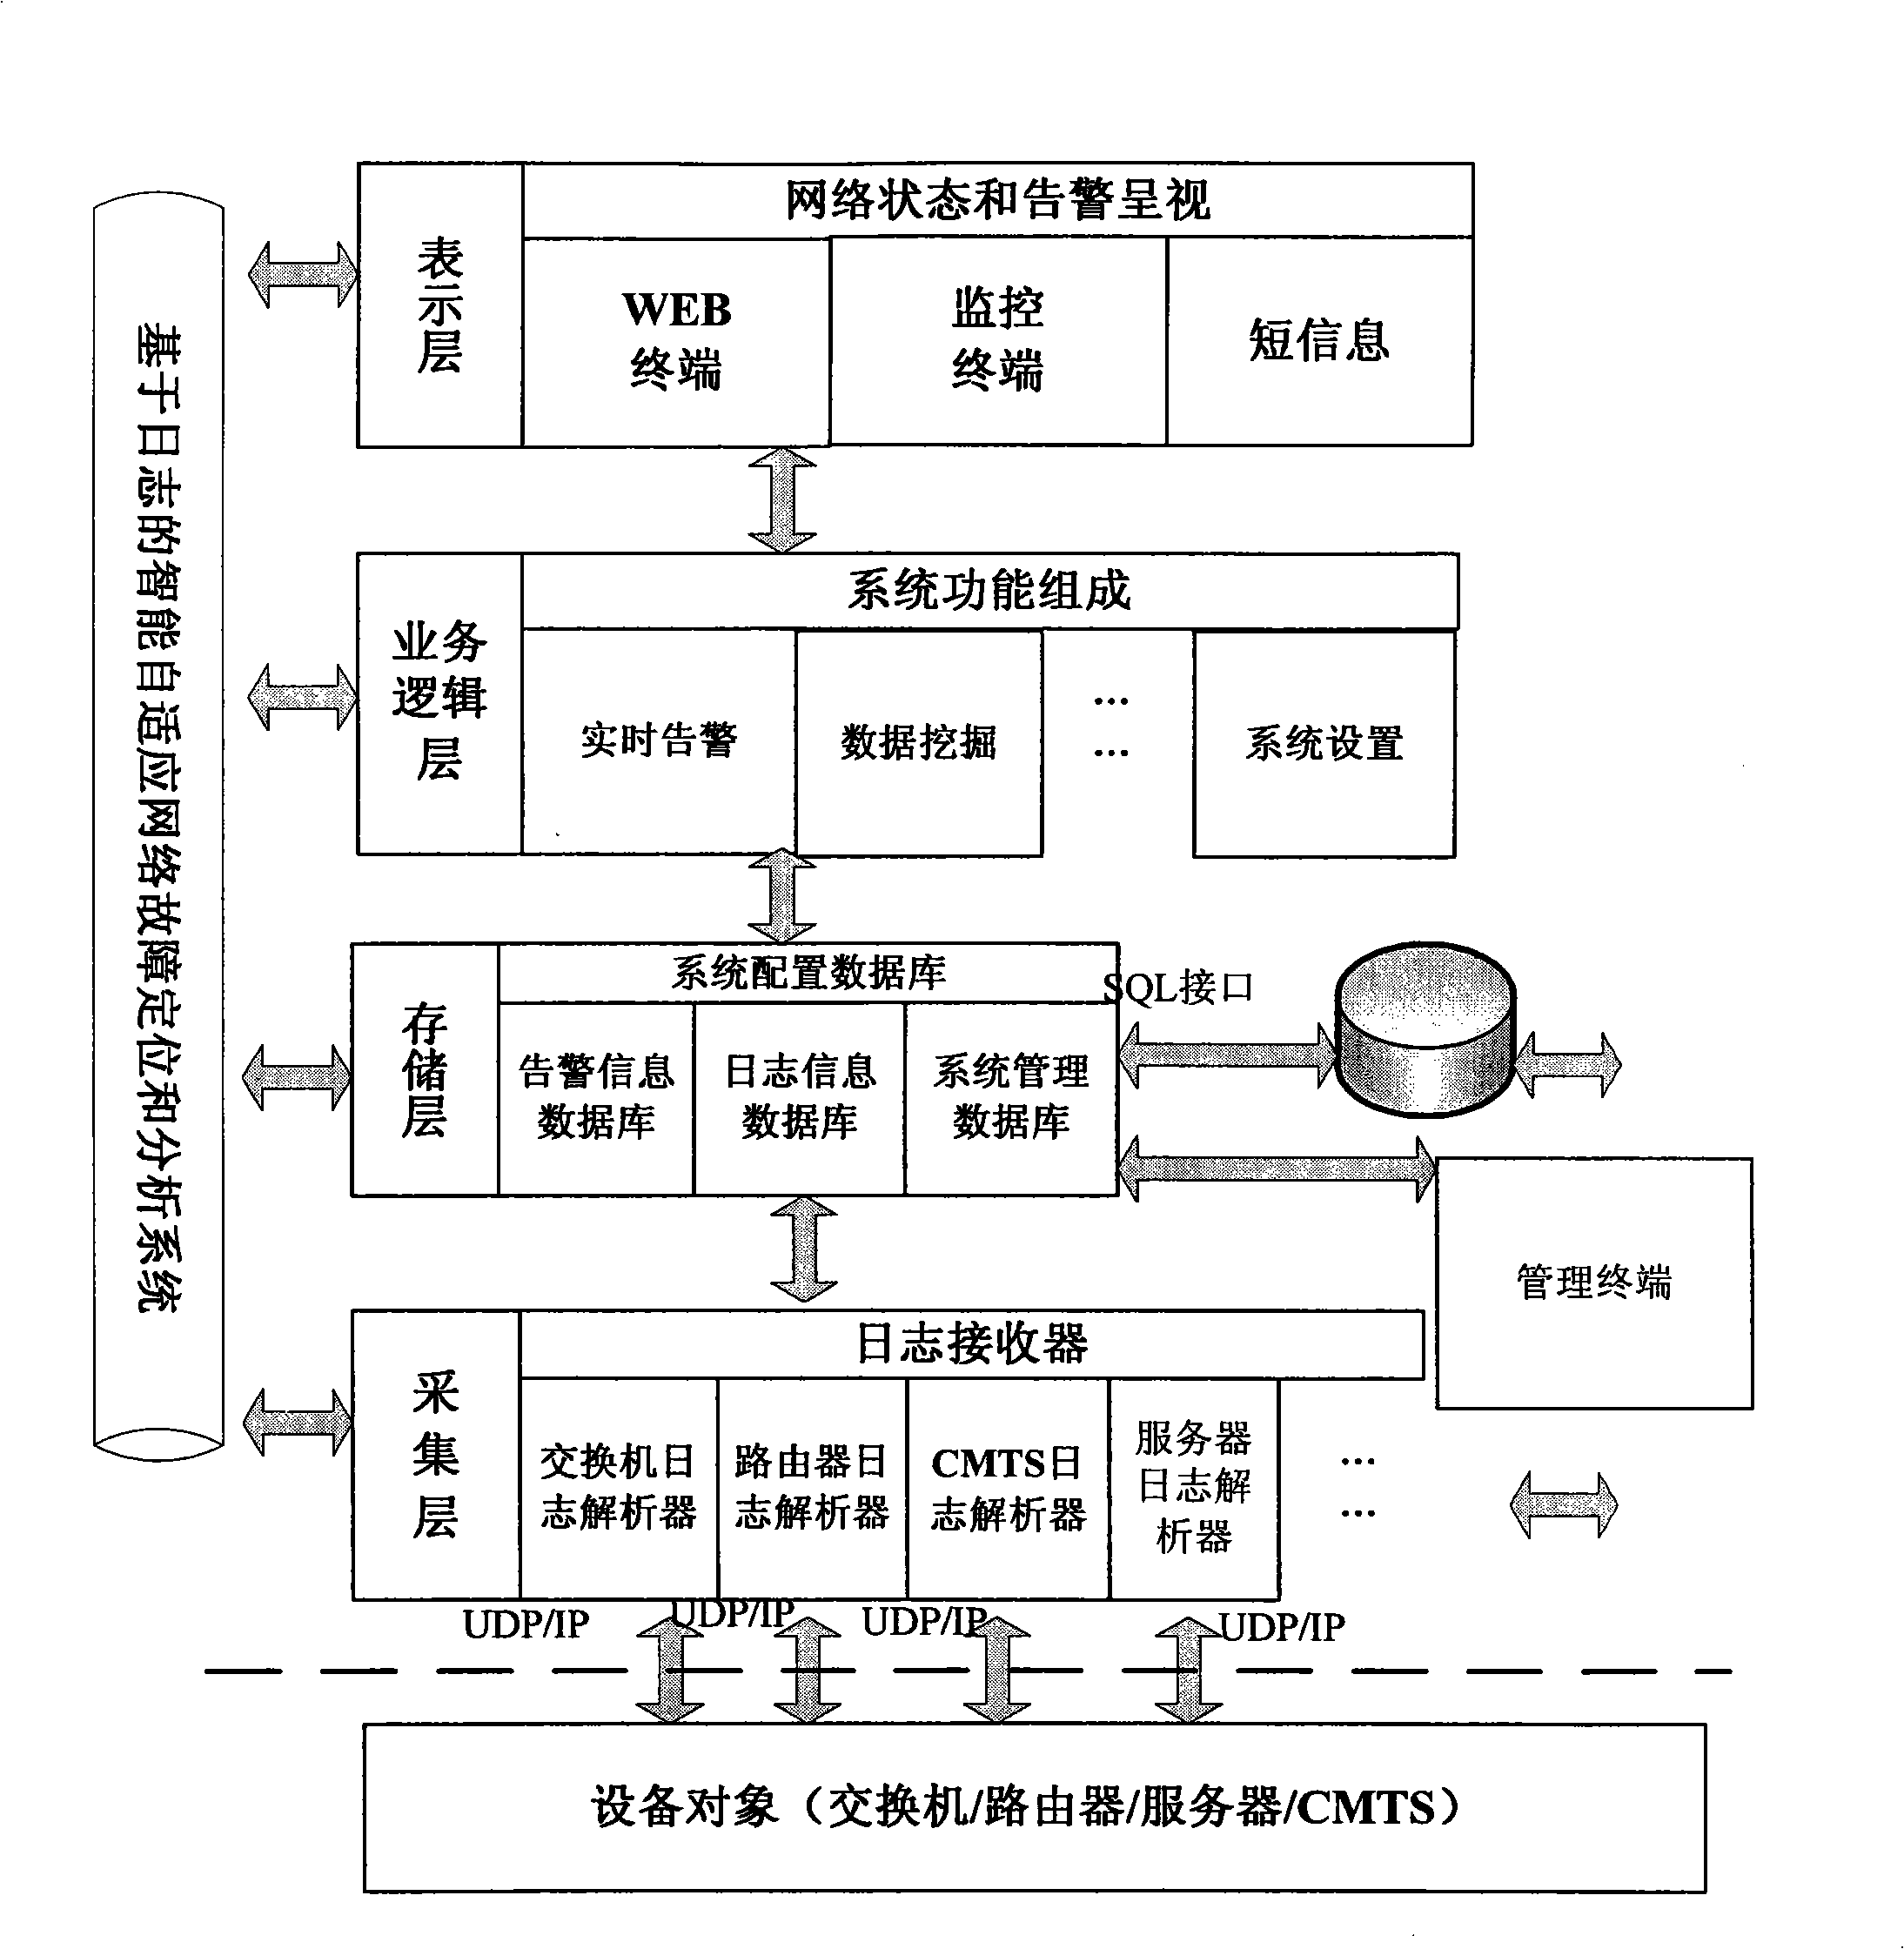 Method for locating and analyzing fault of intelligent self-adapting network based on log